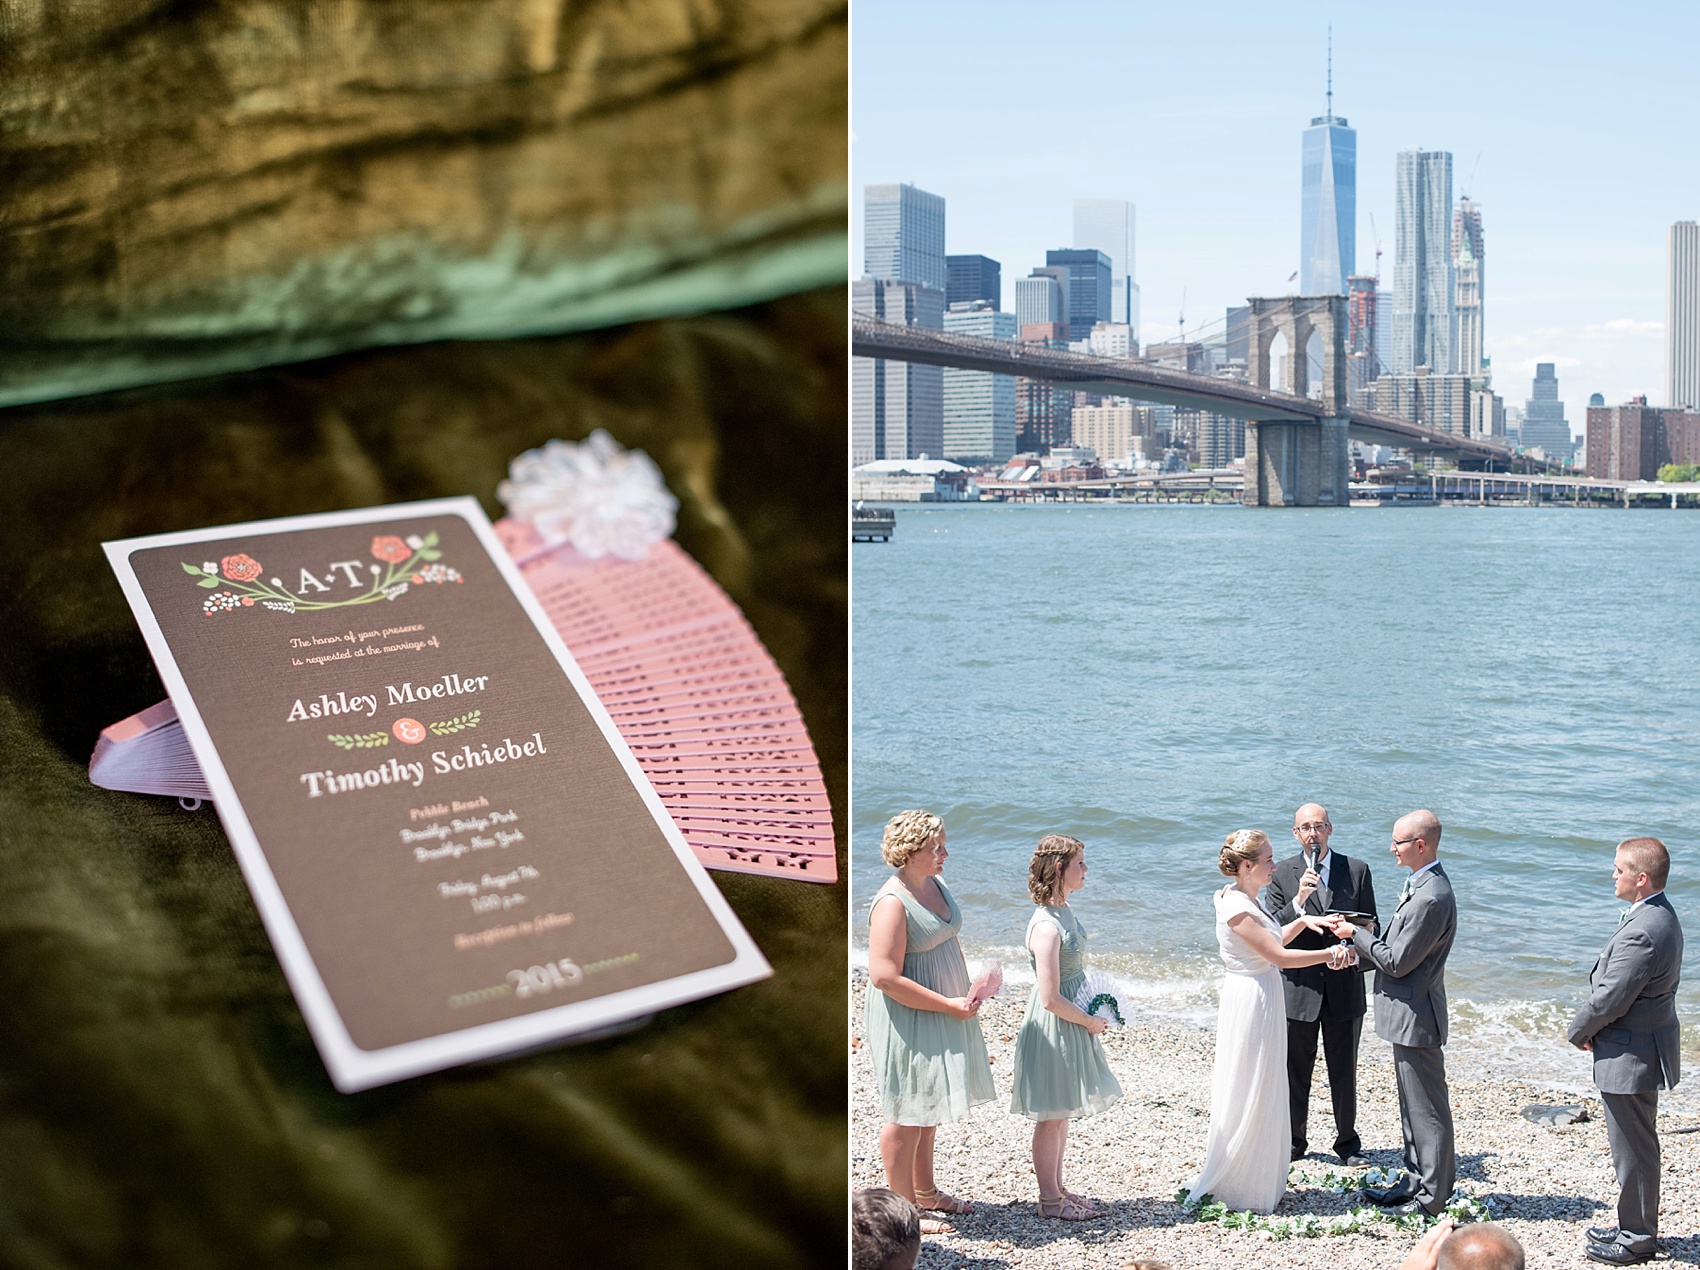 Brown, pink and green wedding invitation and fan program for a Brooklyn Bridge Park waterfront wedding. Photos by Mikkel Paige Photography, NYC wedding photographer.